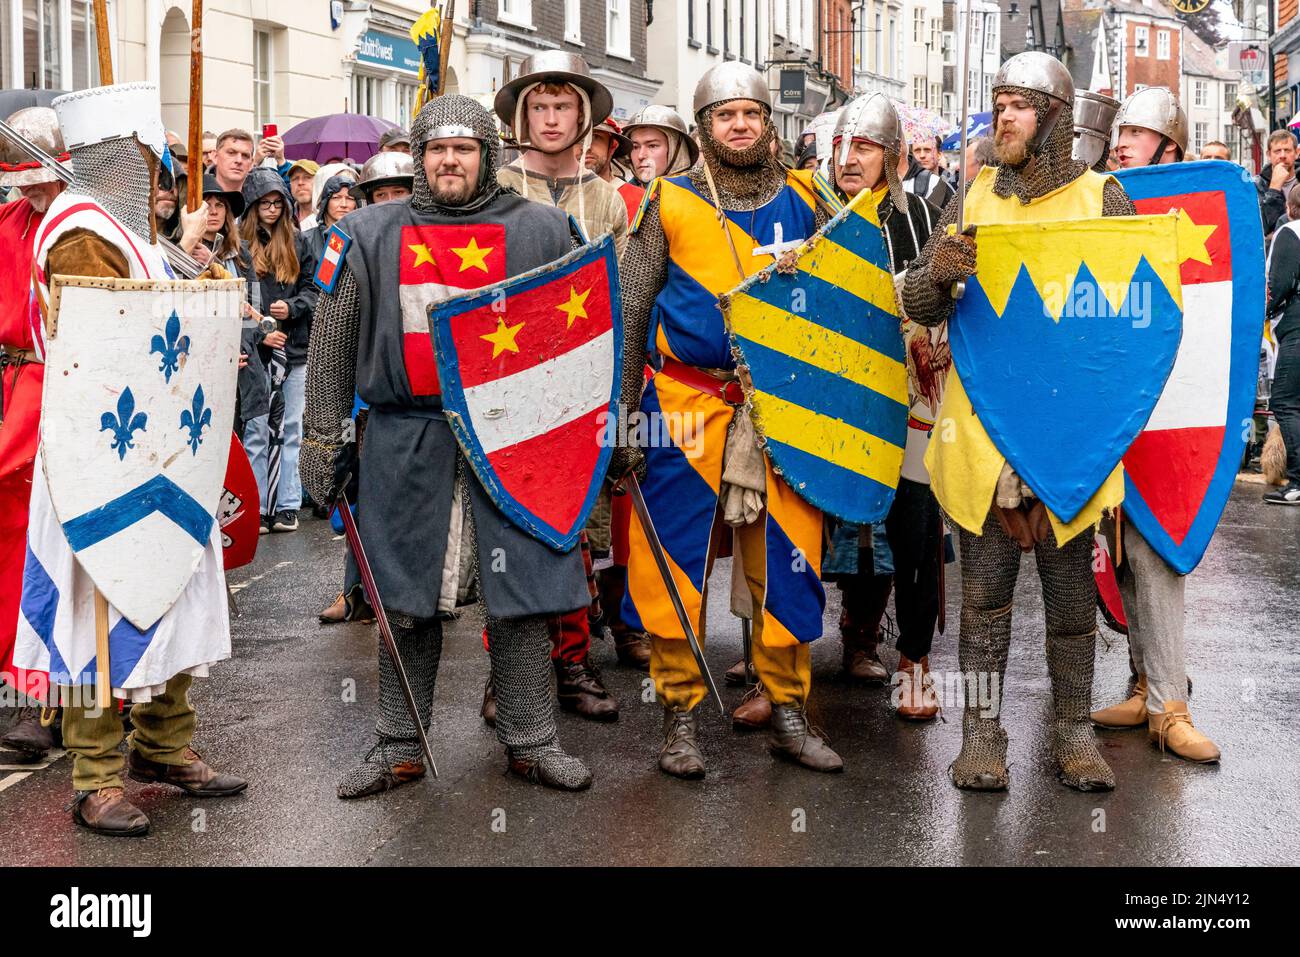 Men In Medieval Costume Prepare To Take Part In The Battle Of Lewes Re-Enactment Event, Lewes, East Sussex, UK Stock Photo